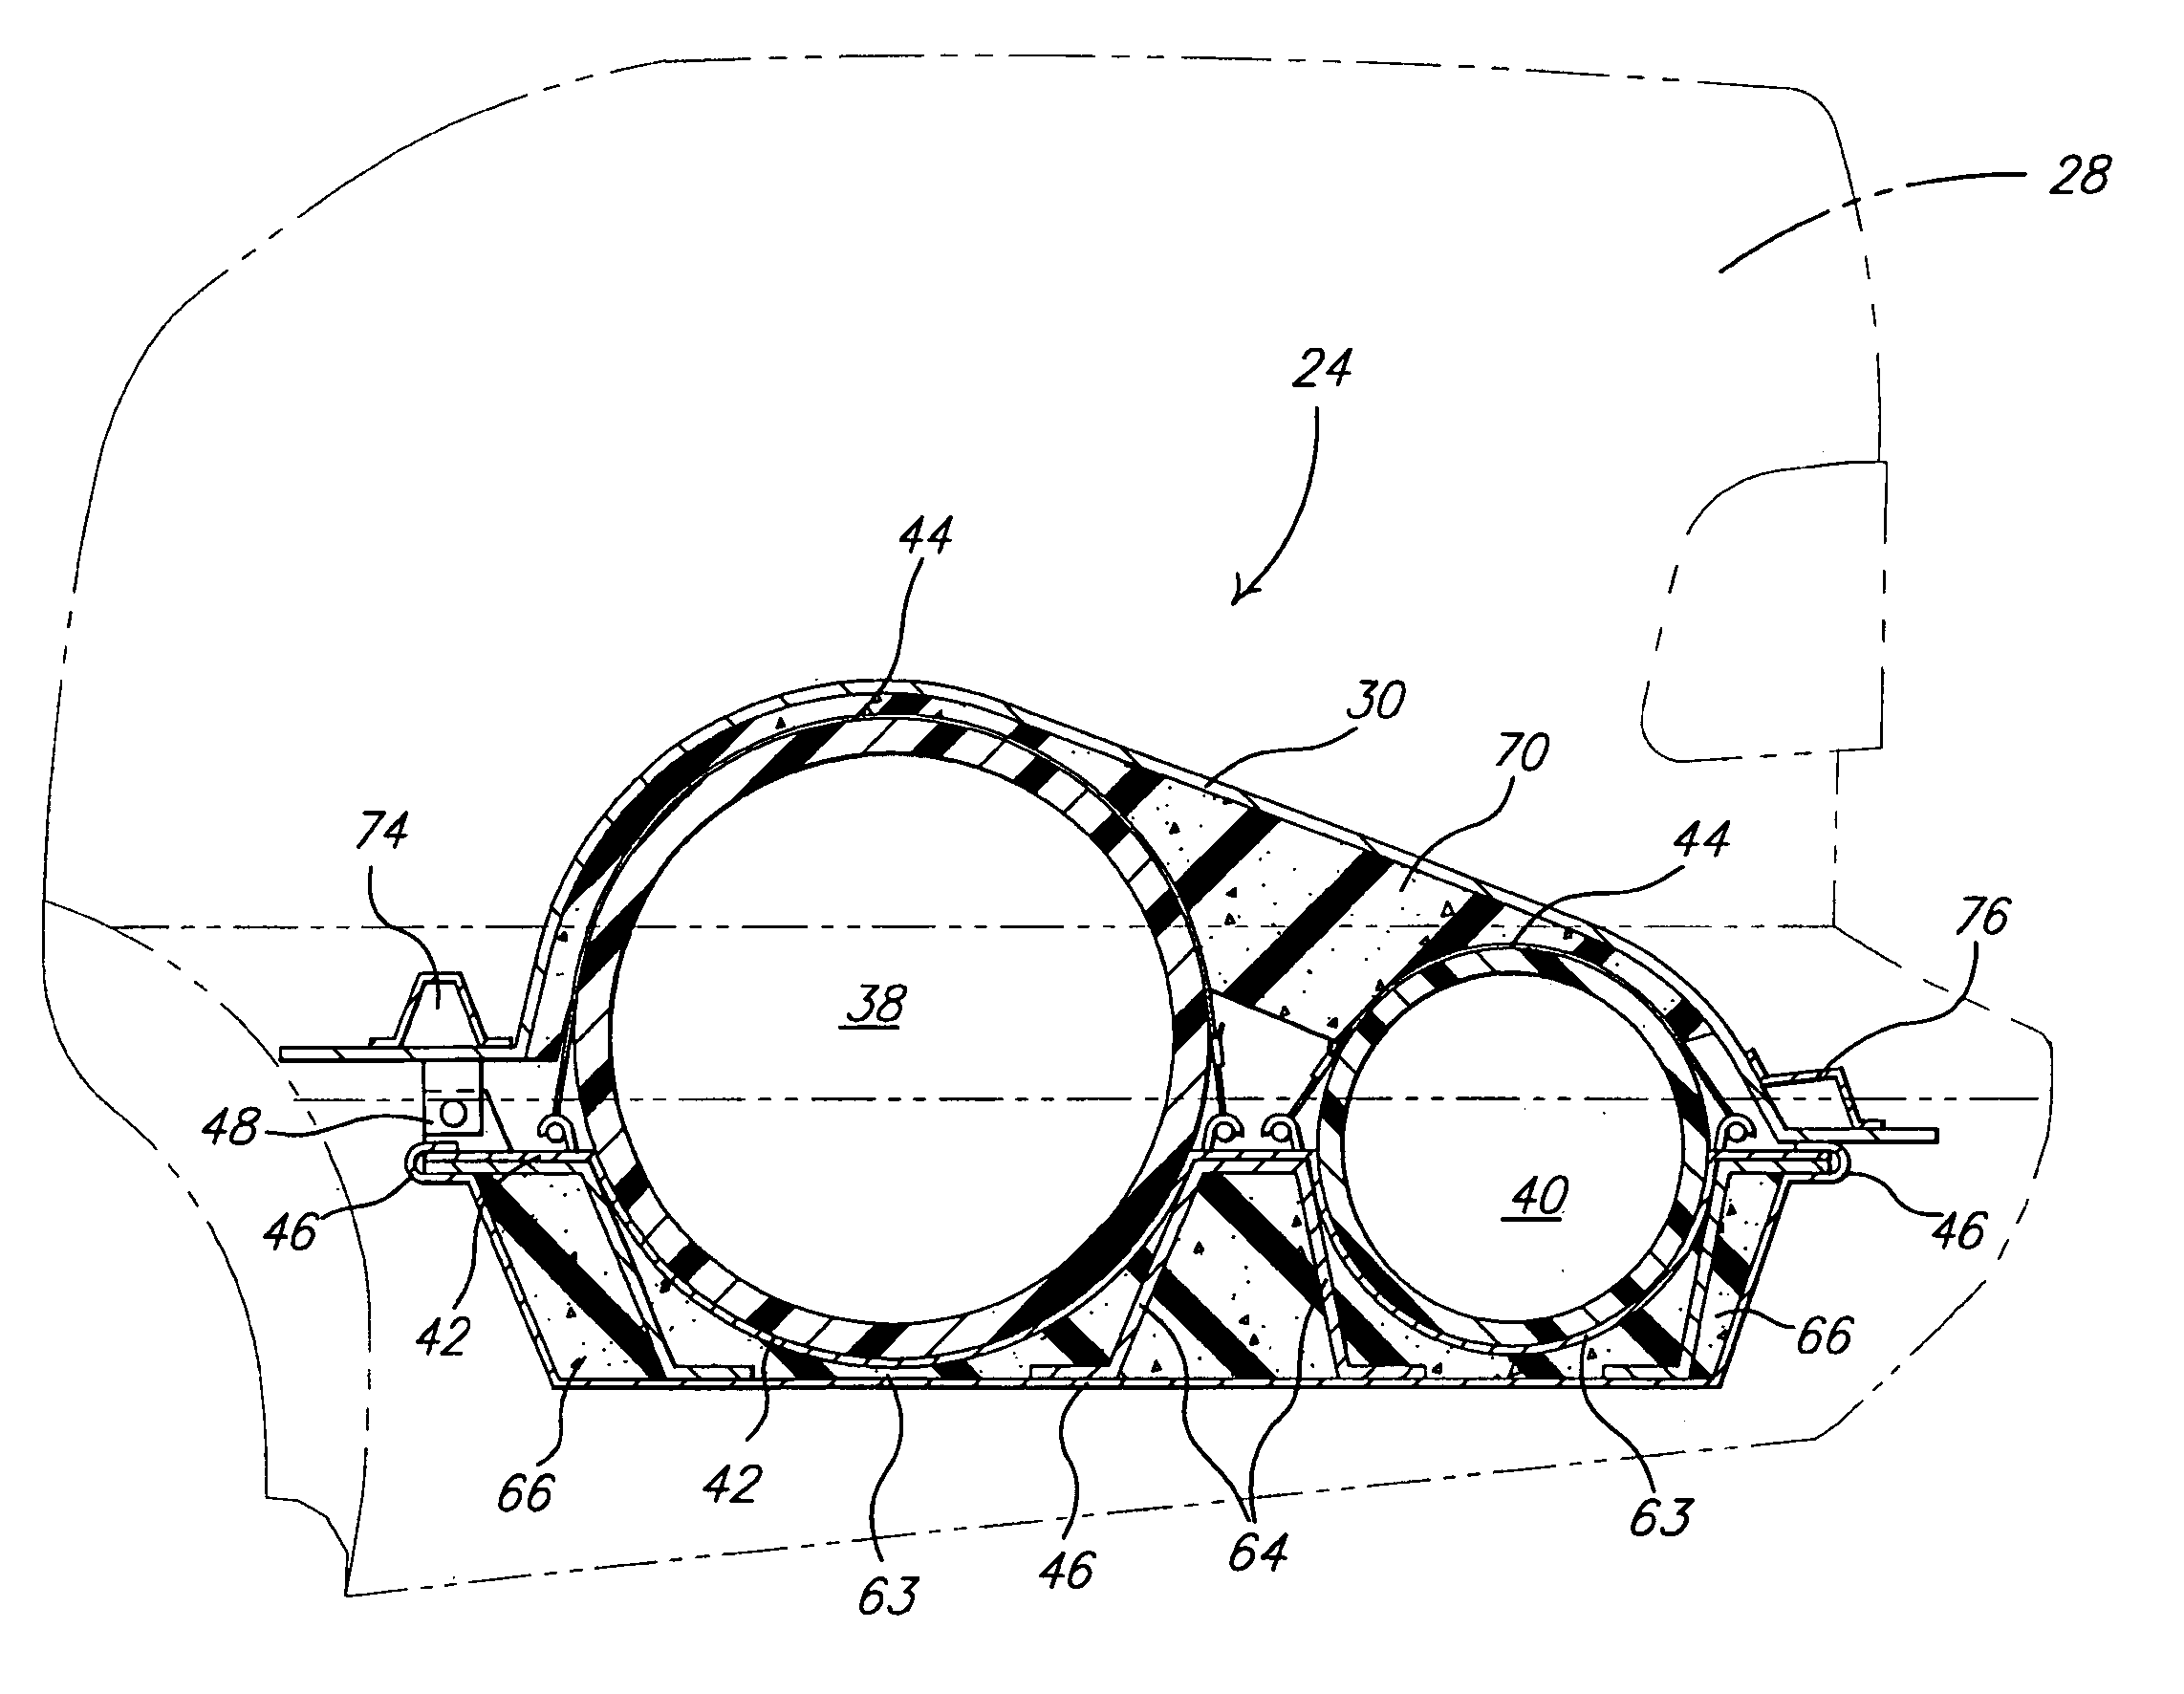 Modular fuel storage system for a vehicle